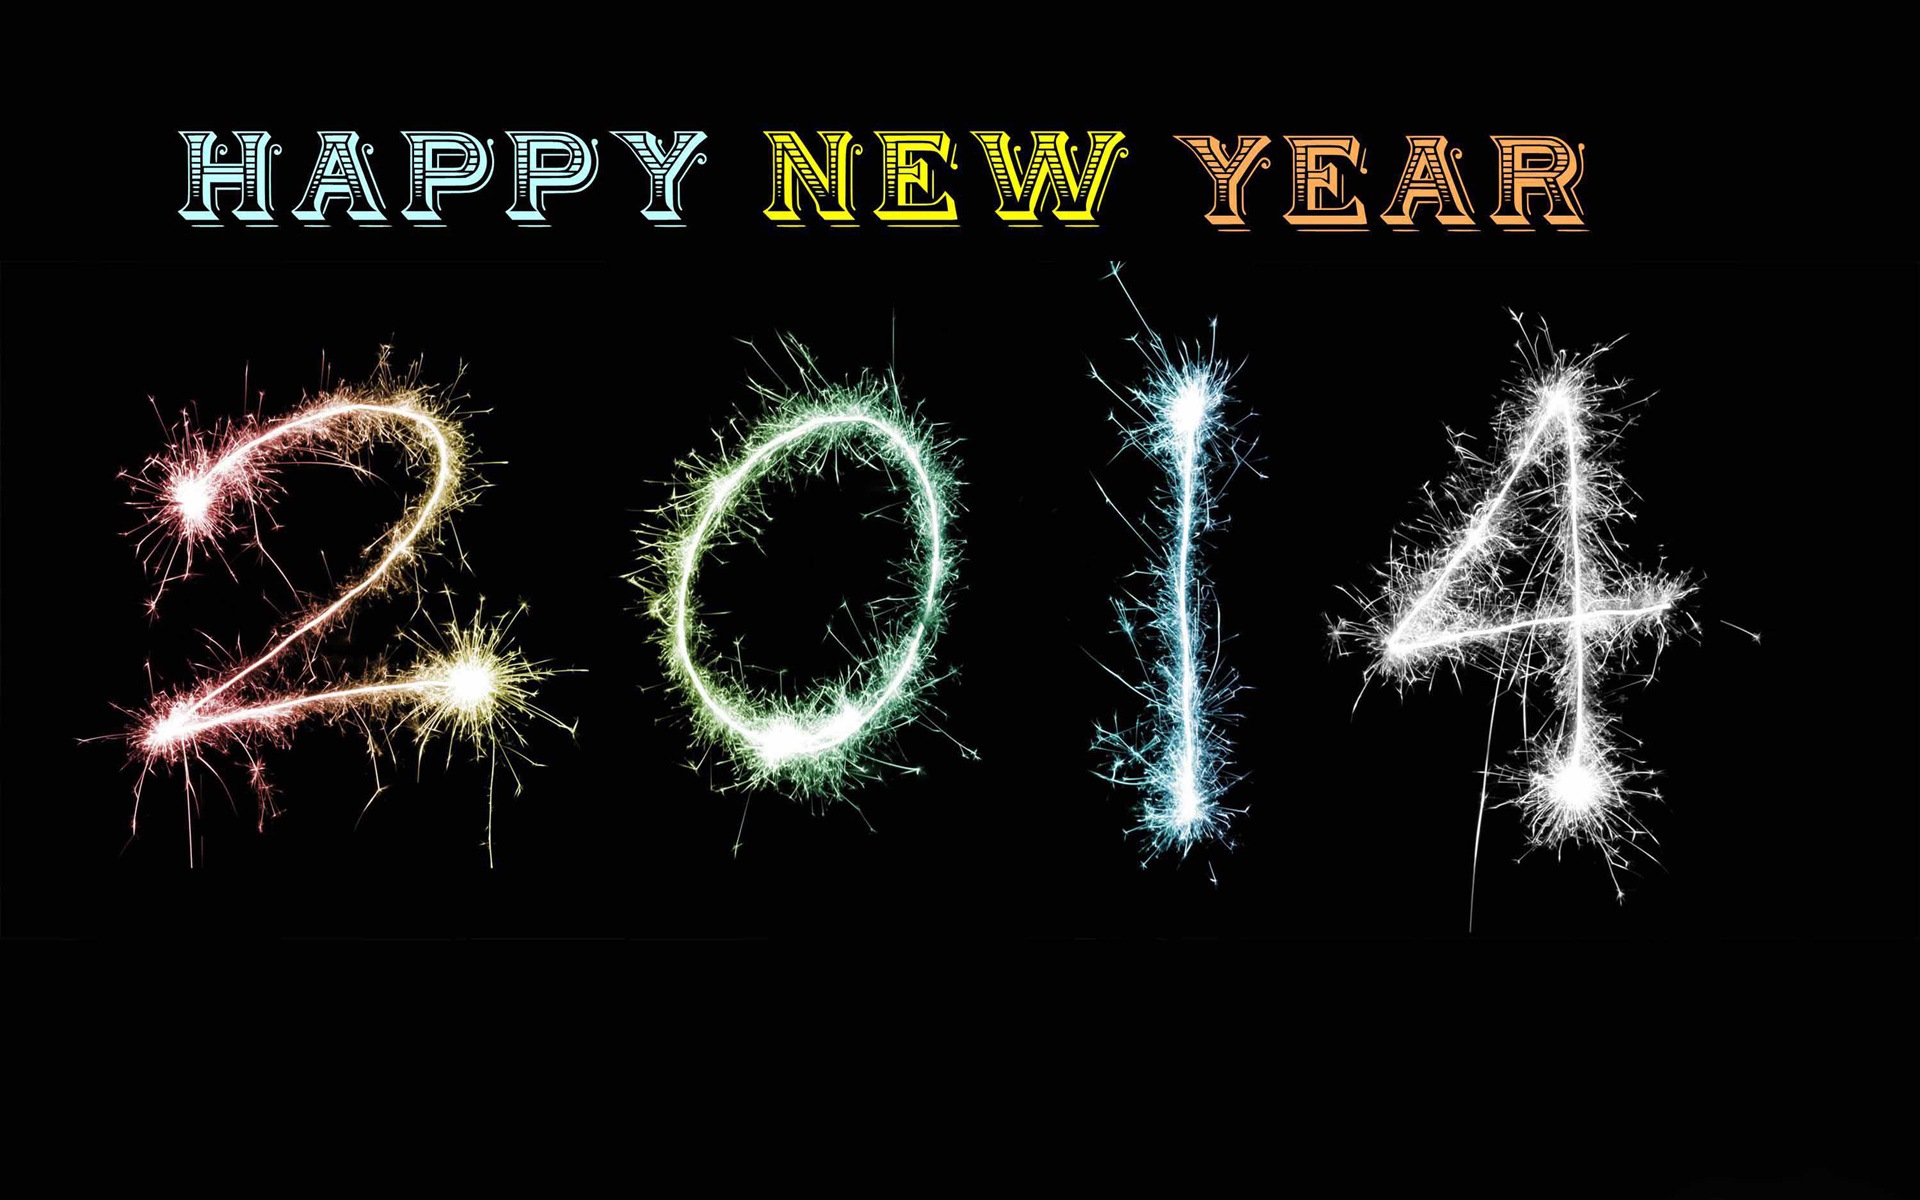 2014 New Year Theme HD Wallpapers (2) #12 - 1920x1200